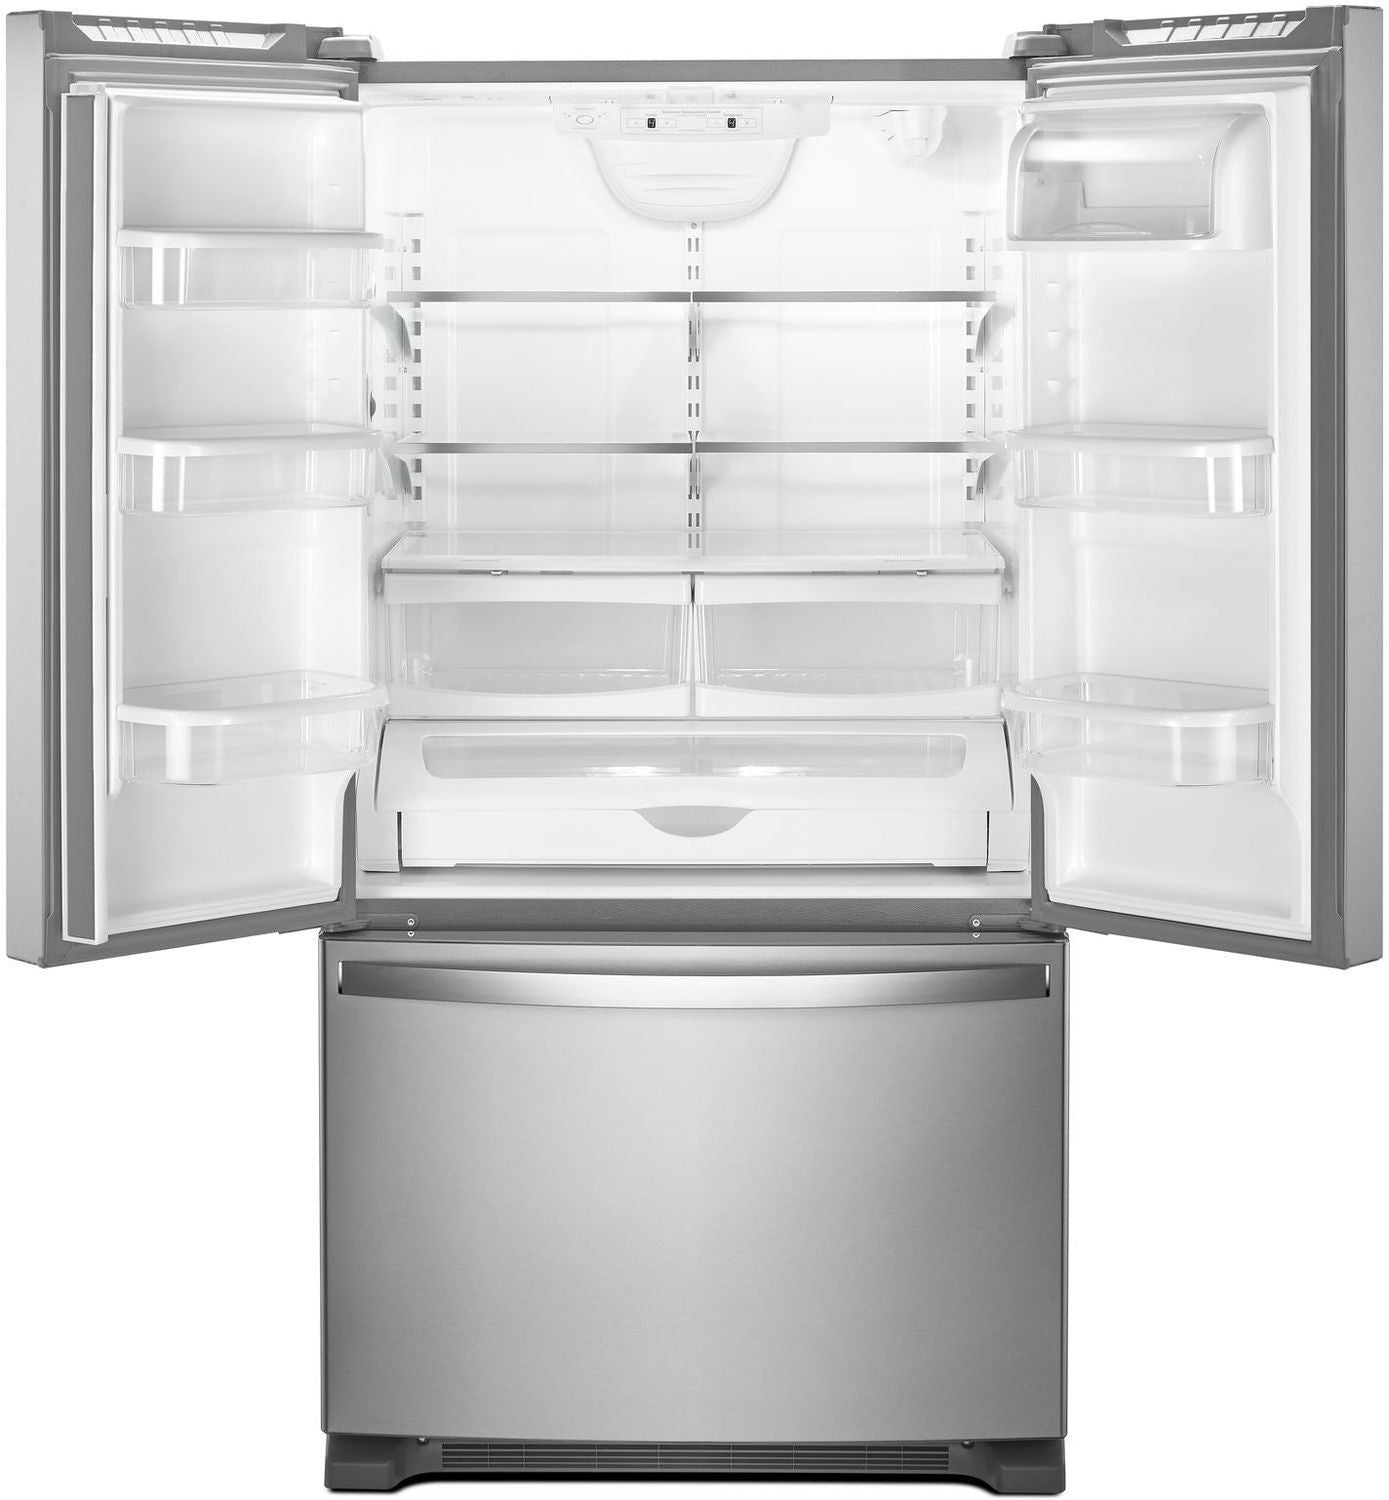 Whirlpool Stainless Steel Counter-Depth French Door Refrigerator (20 Cu. Ft.) - WRF540CWHZ